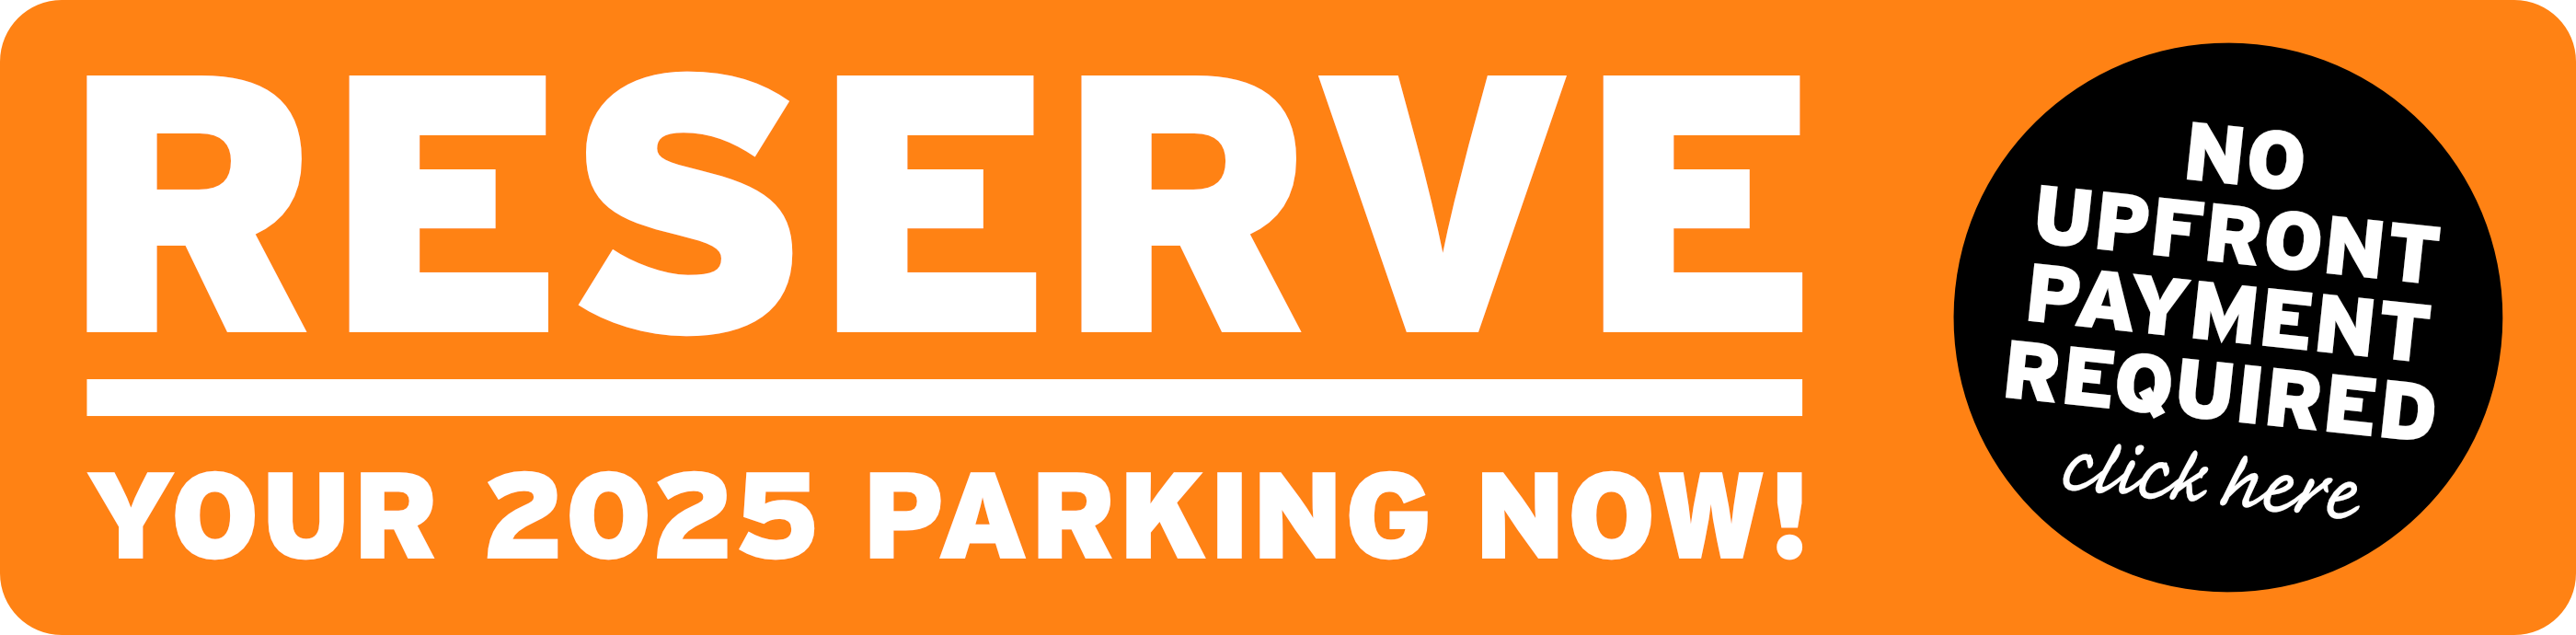 Reserve your parking now!